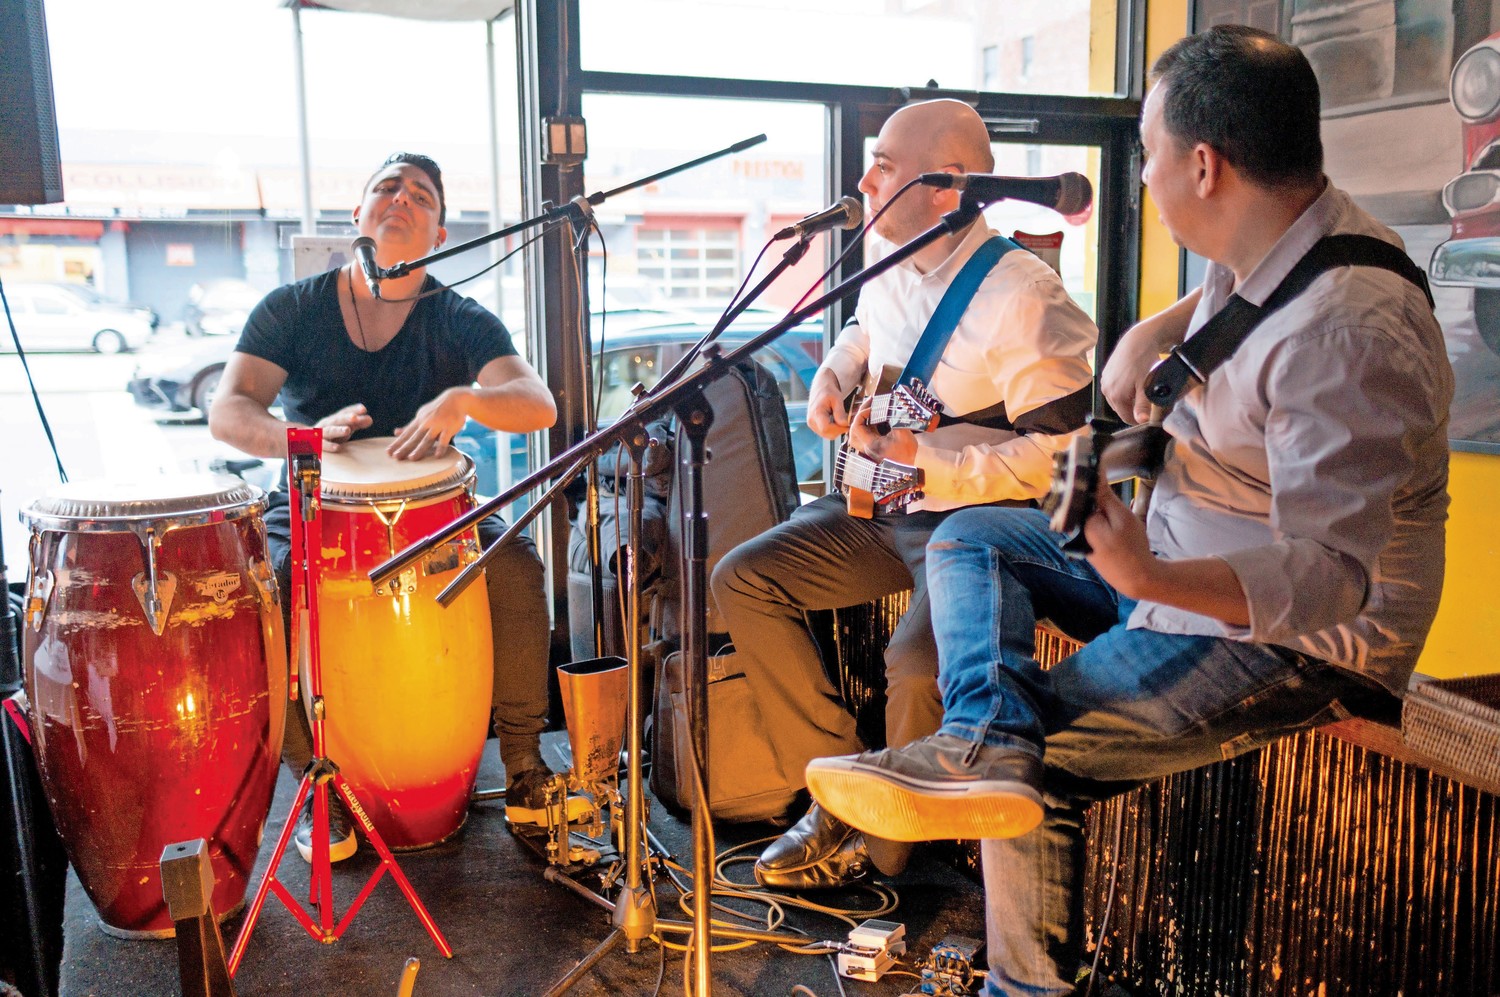 The musical group Trio La Cumbancha plays Cuban music at Amor Cubano, a Cuban restaurant in Harlem. A fundraiser was held for Lehman College students who are planning a weeklong trip to Cuba as part of their coursework.